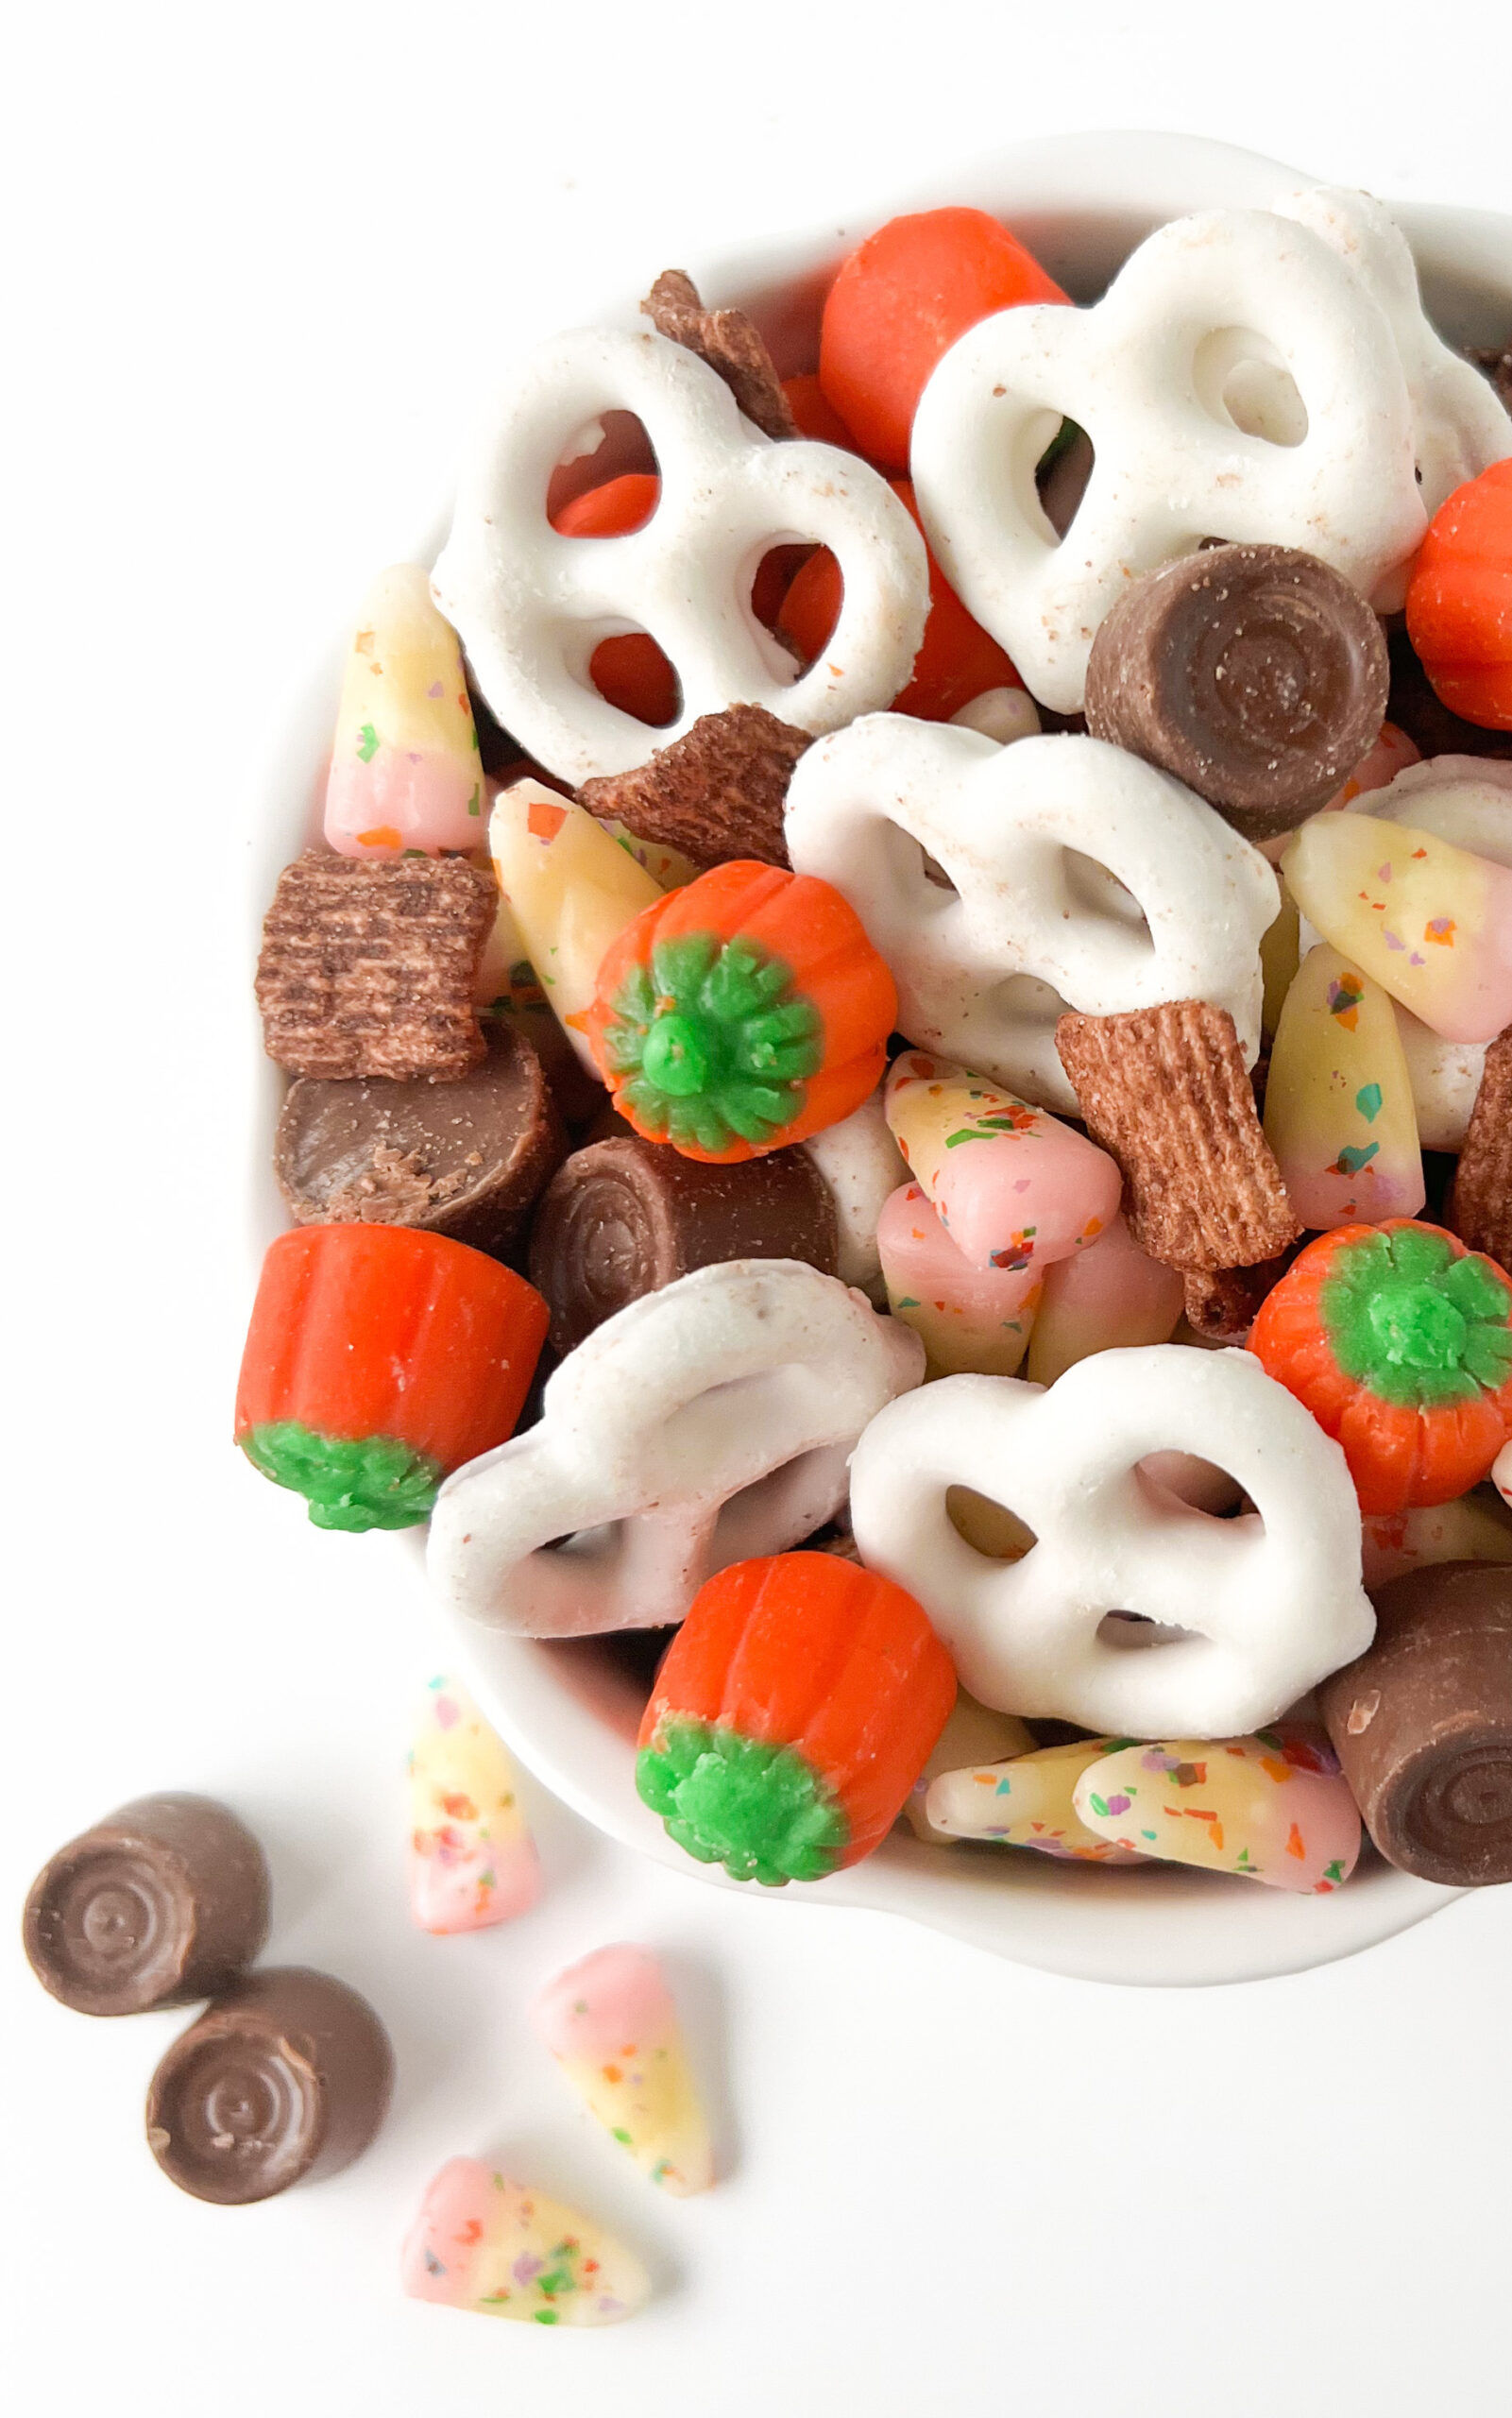 up close fall snack mix with cereal, pretzels, chocolates and candy corns